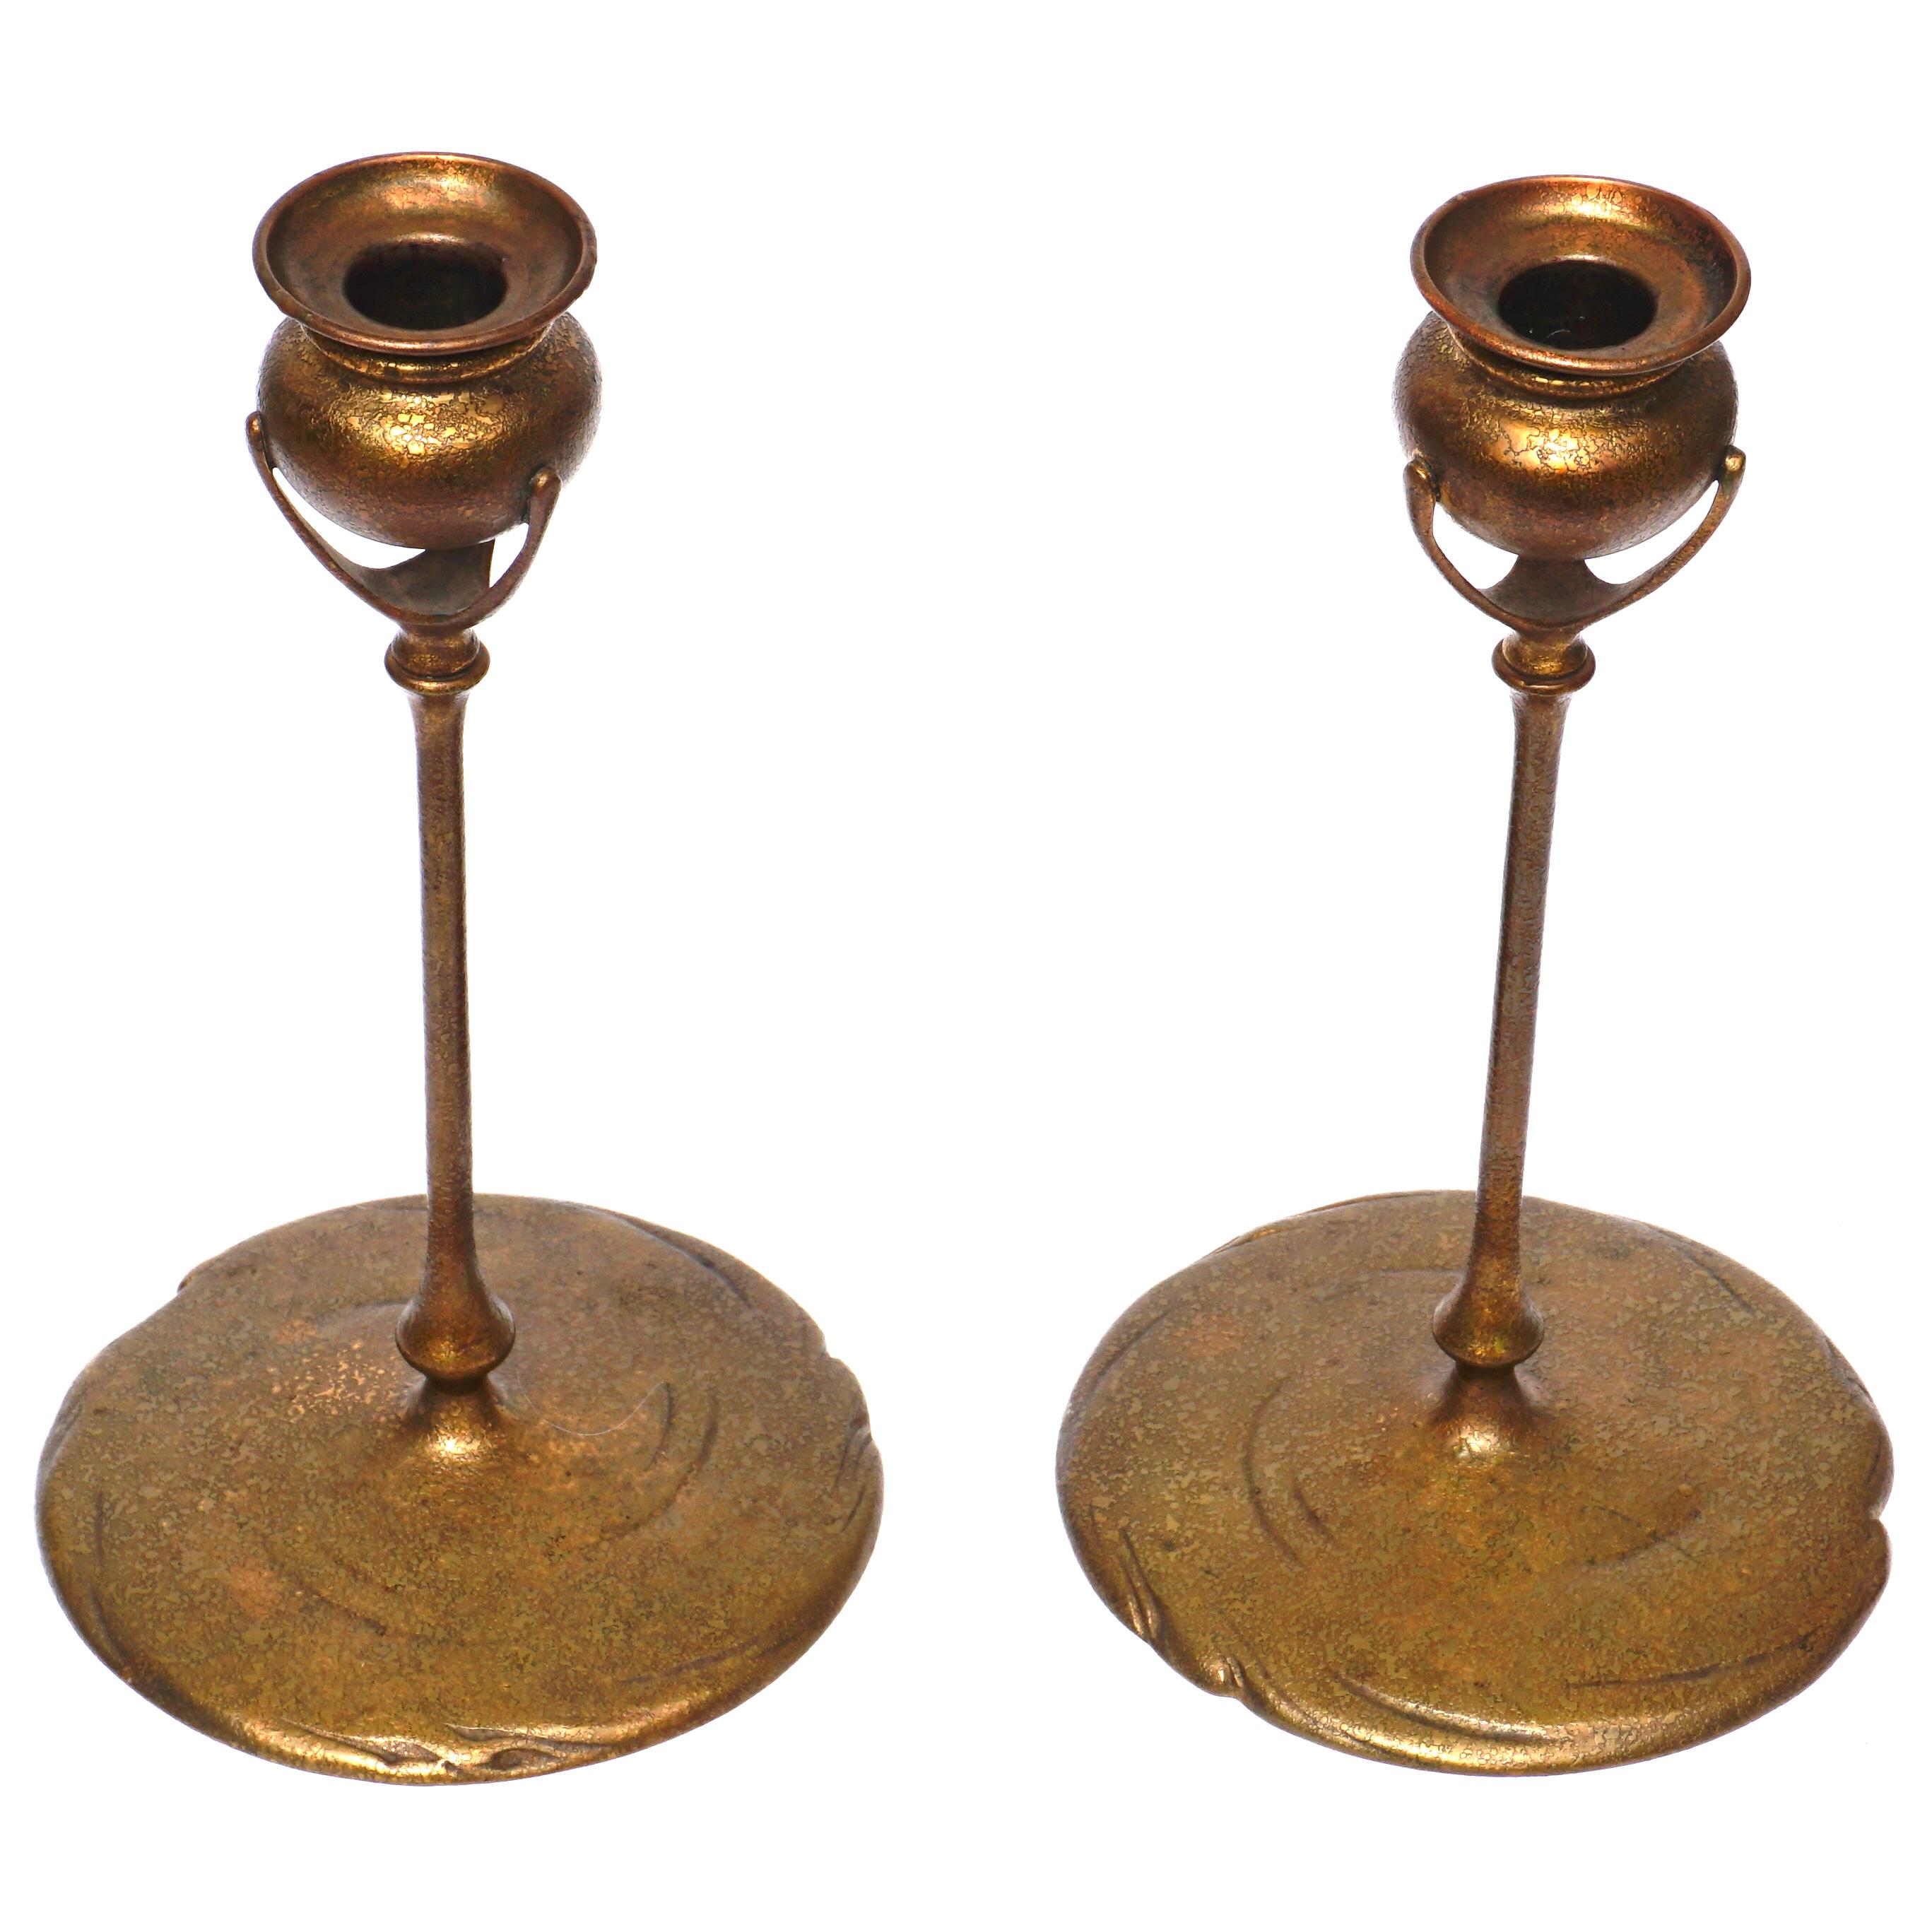 Pair of Tiffany Studios gilt bronze candlesticks, circa 1905 Art Nouveau
Marks: TIFFANY STUDIOS, NEW YORK, 1213 
Measures: Height: 10 inches (25.4 cm) (each), Diameter: 5.75 inches
Condition: Very good with slight rubbing to gilding. Original